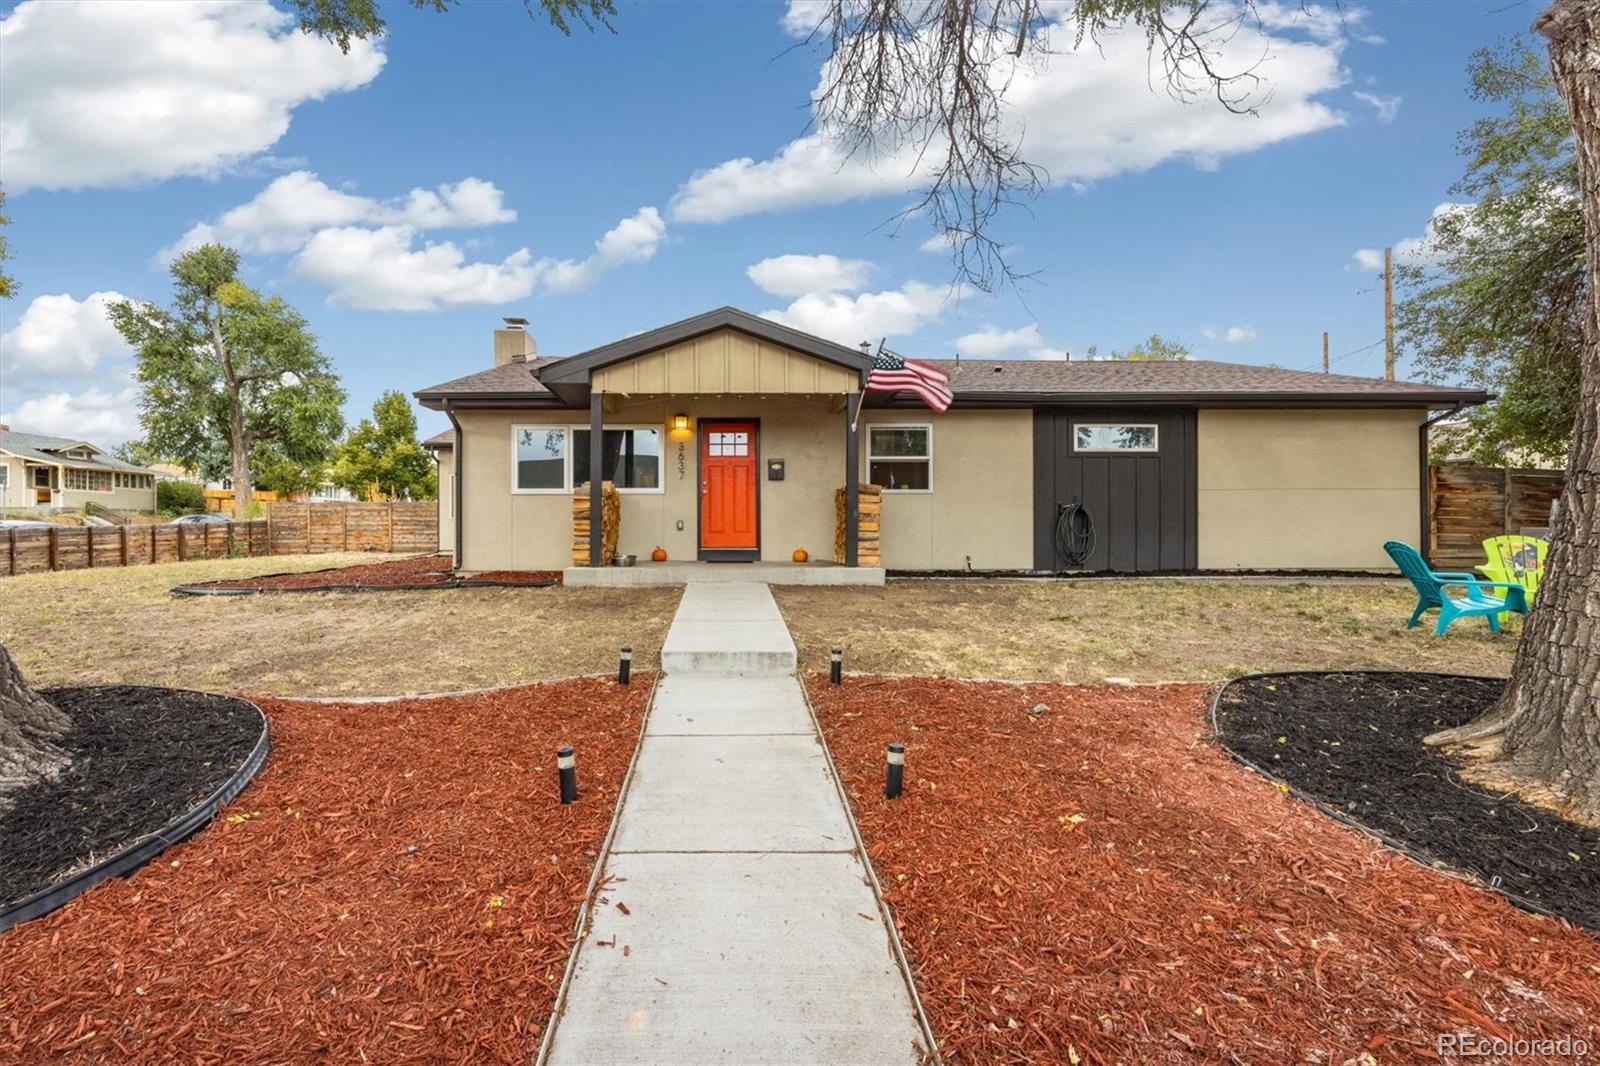 3637 w 48th avenue, Denver sold home. Closed on 2024-02-28 for $660,000.